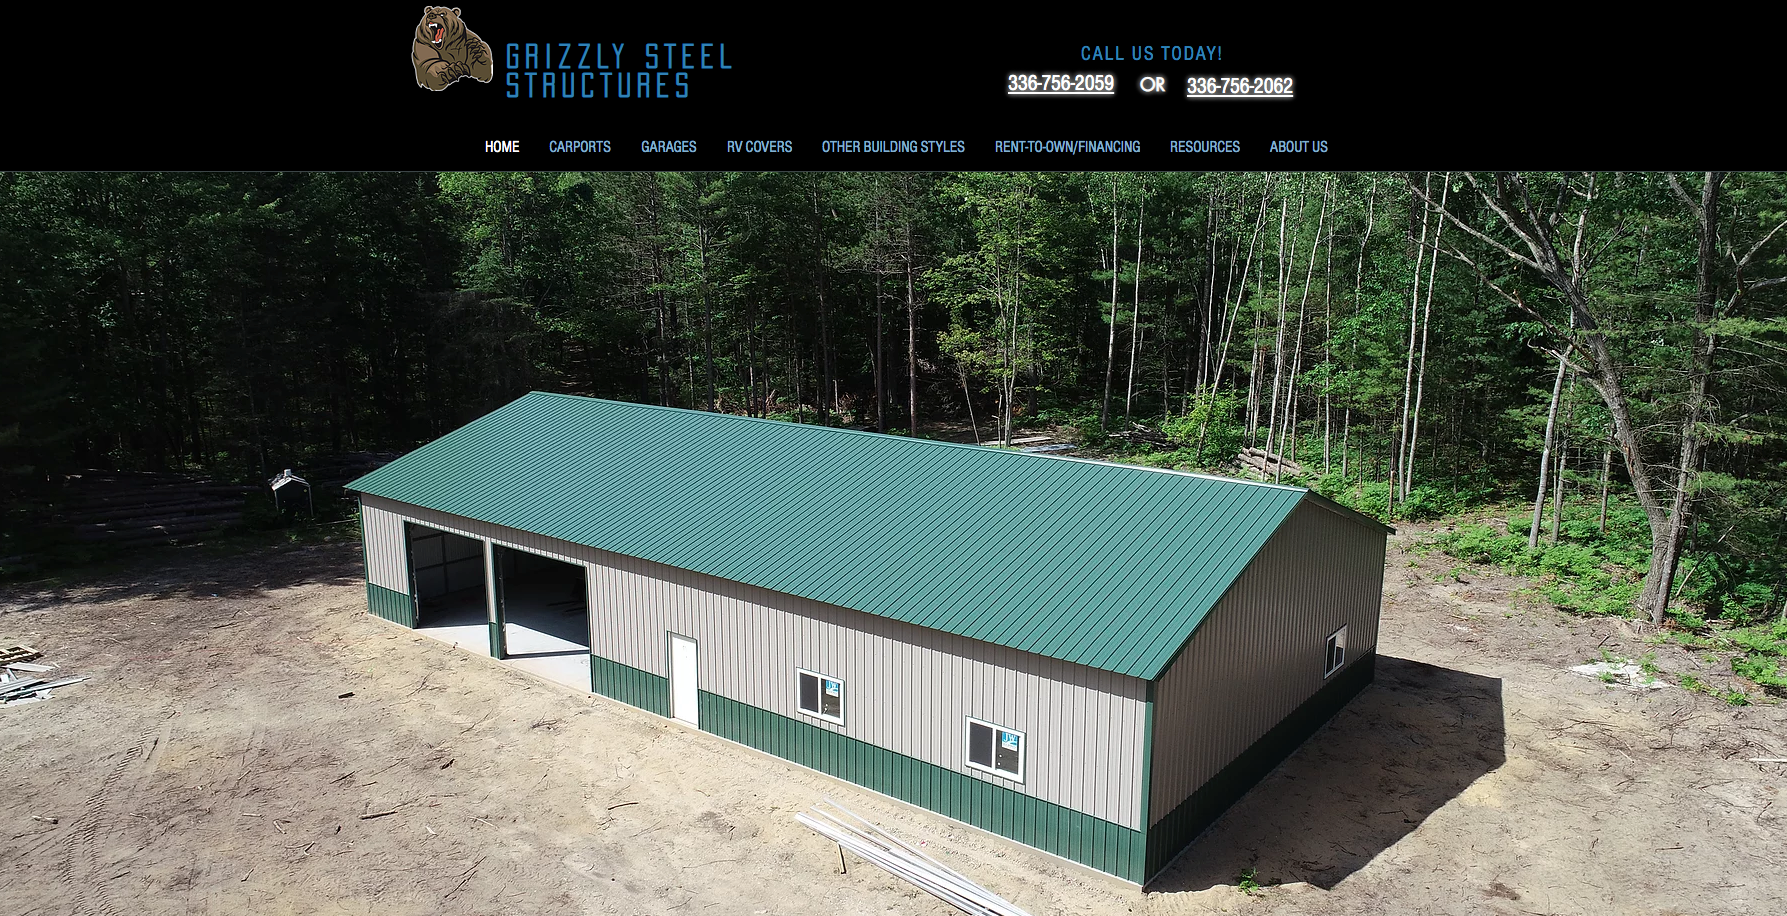 Metal RV Carports - Grizzly Steel Structures